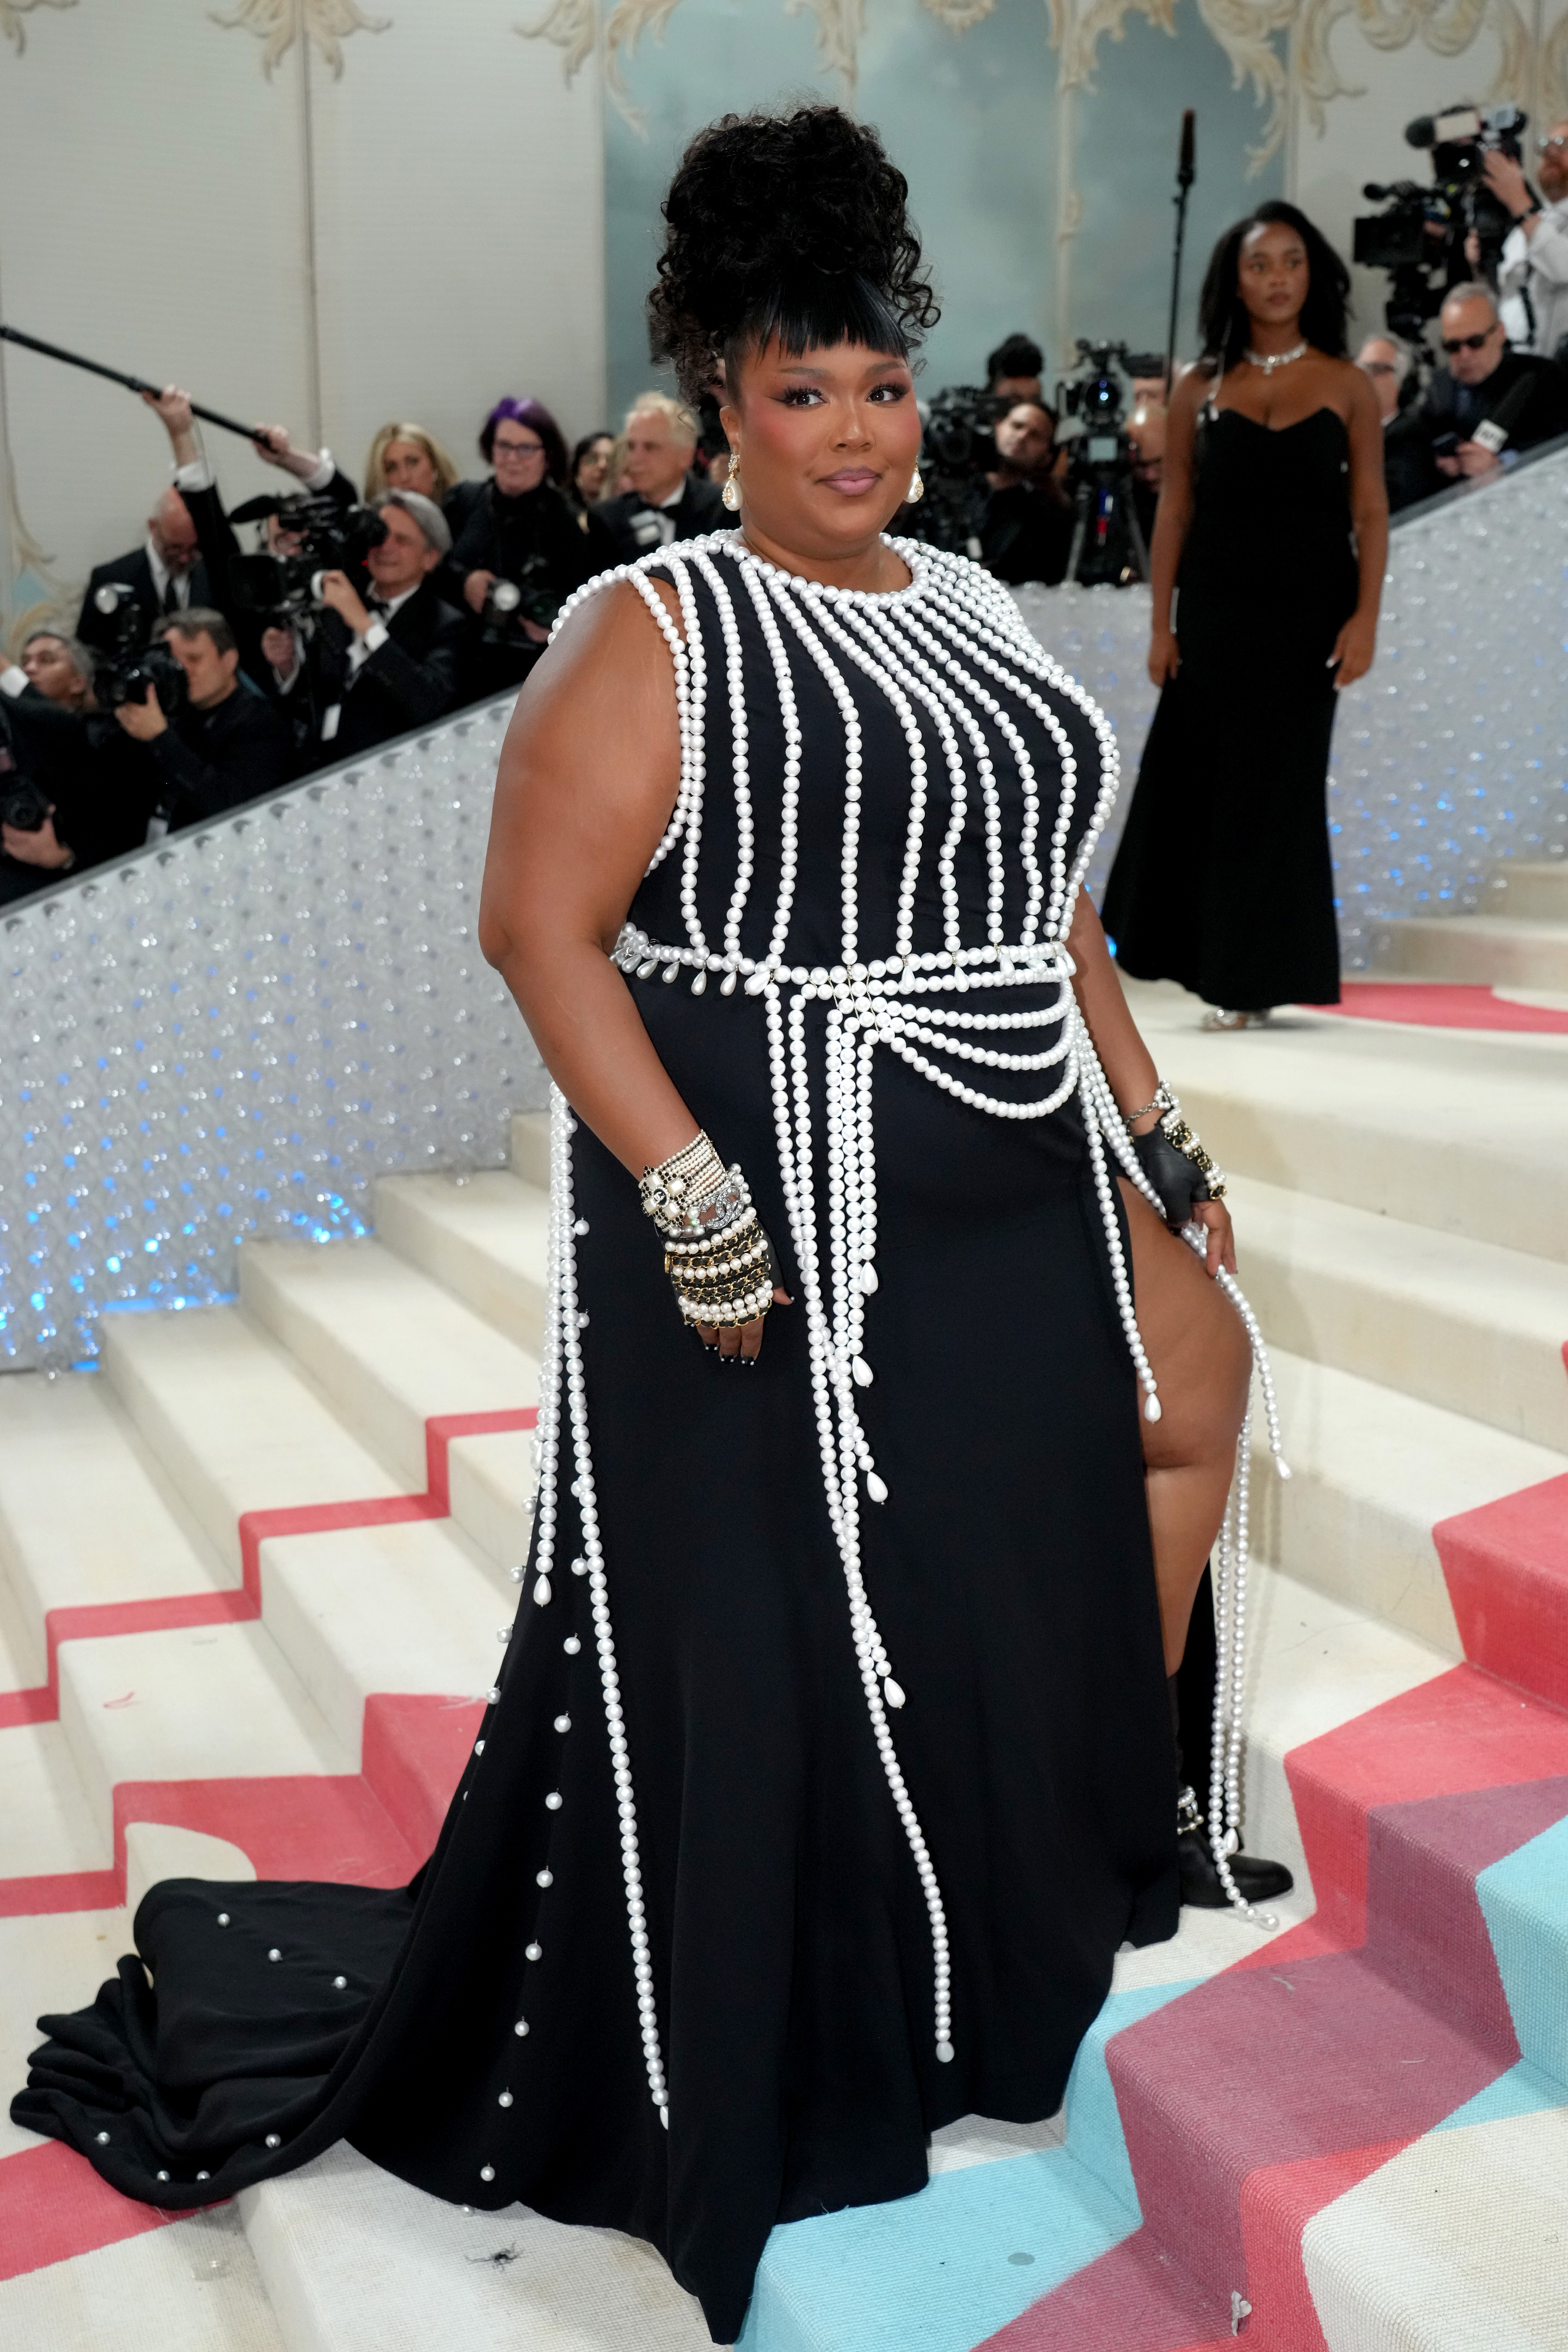 Lizzo stands on stairs in a black dress with white beaded embellishments, bracelets, and updo hairstyle